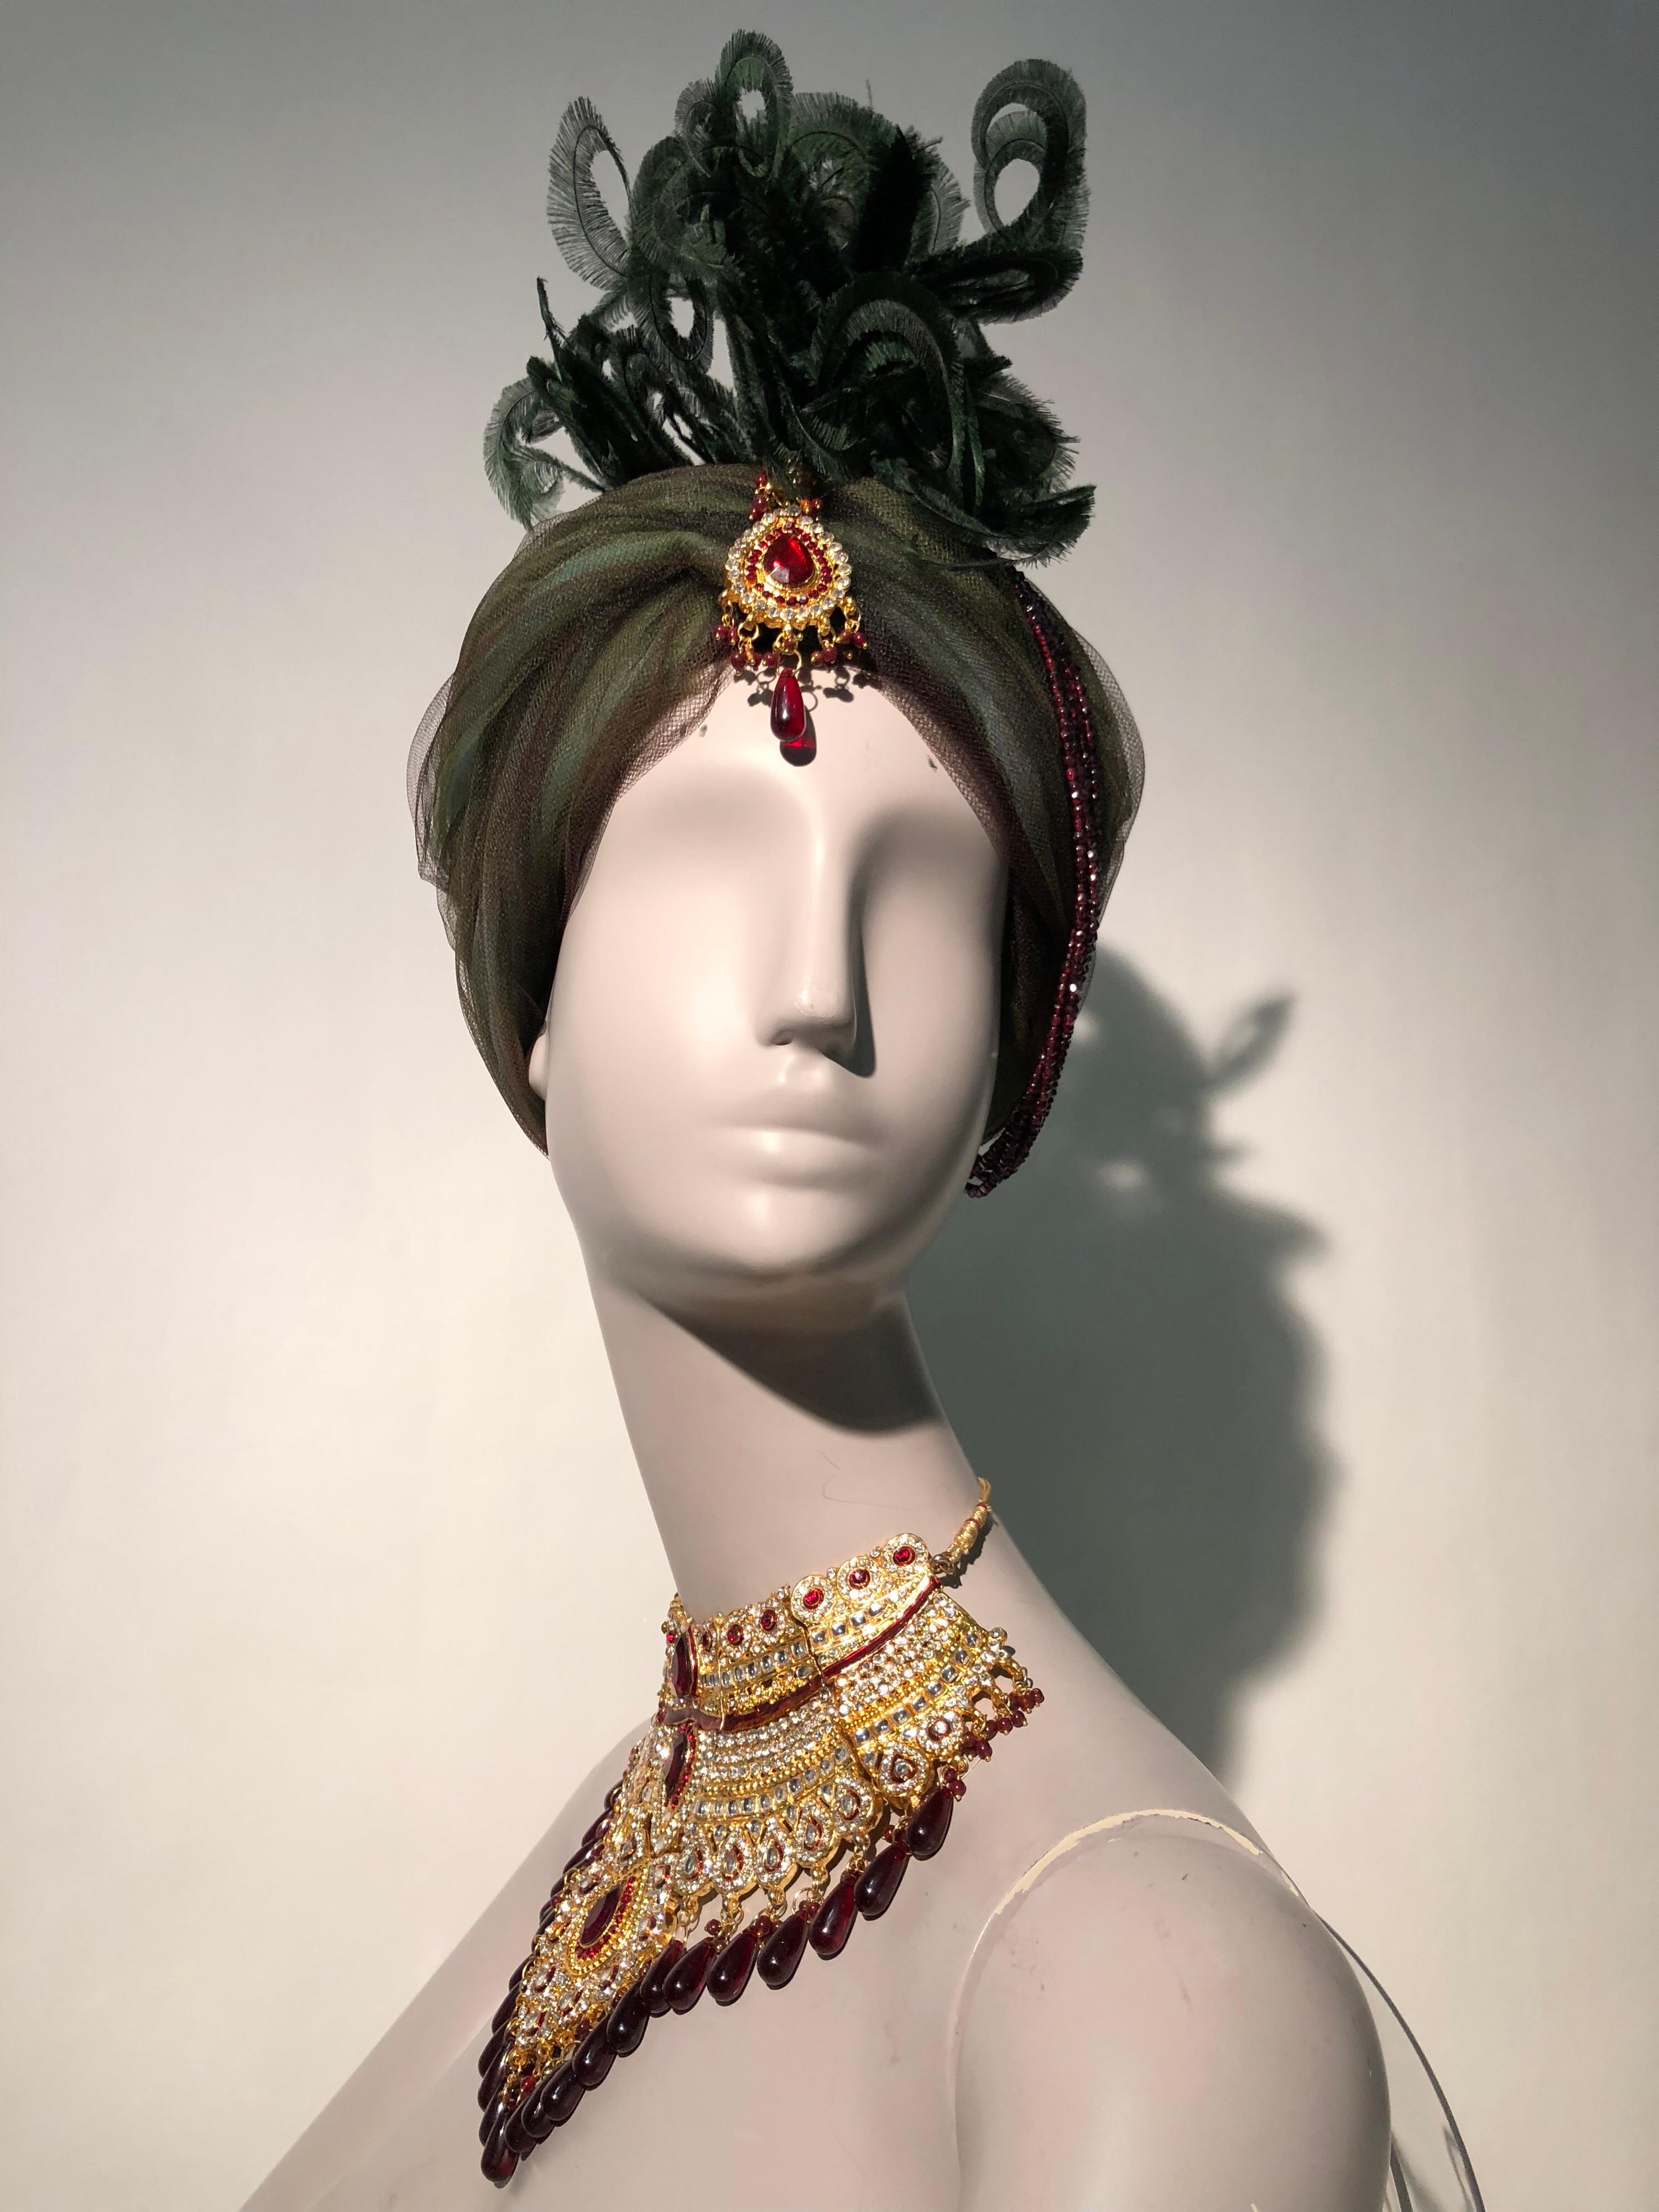 A gorgeous costume set: a 1960s Mr. Robert green and brown tulle turban hat with a spectacular crest of curled green feathers. Turban is jeweled at center front with crimson resin brooch. Five strands of genuine garnets are draped from center front